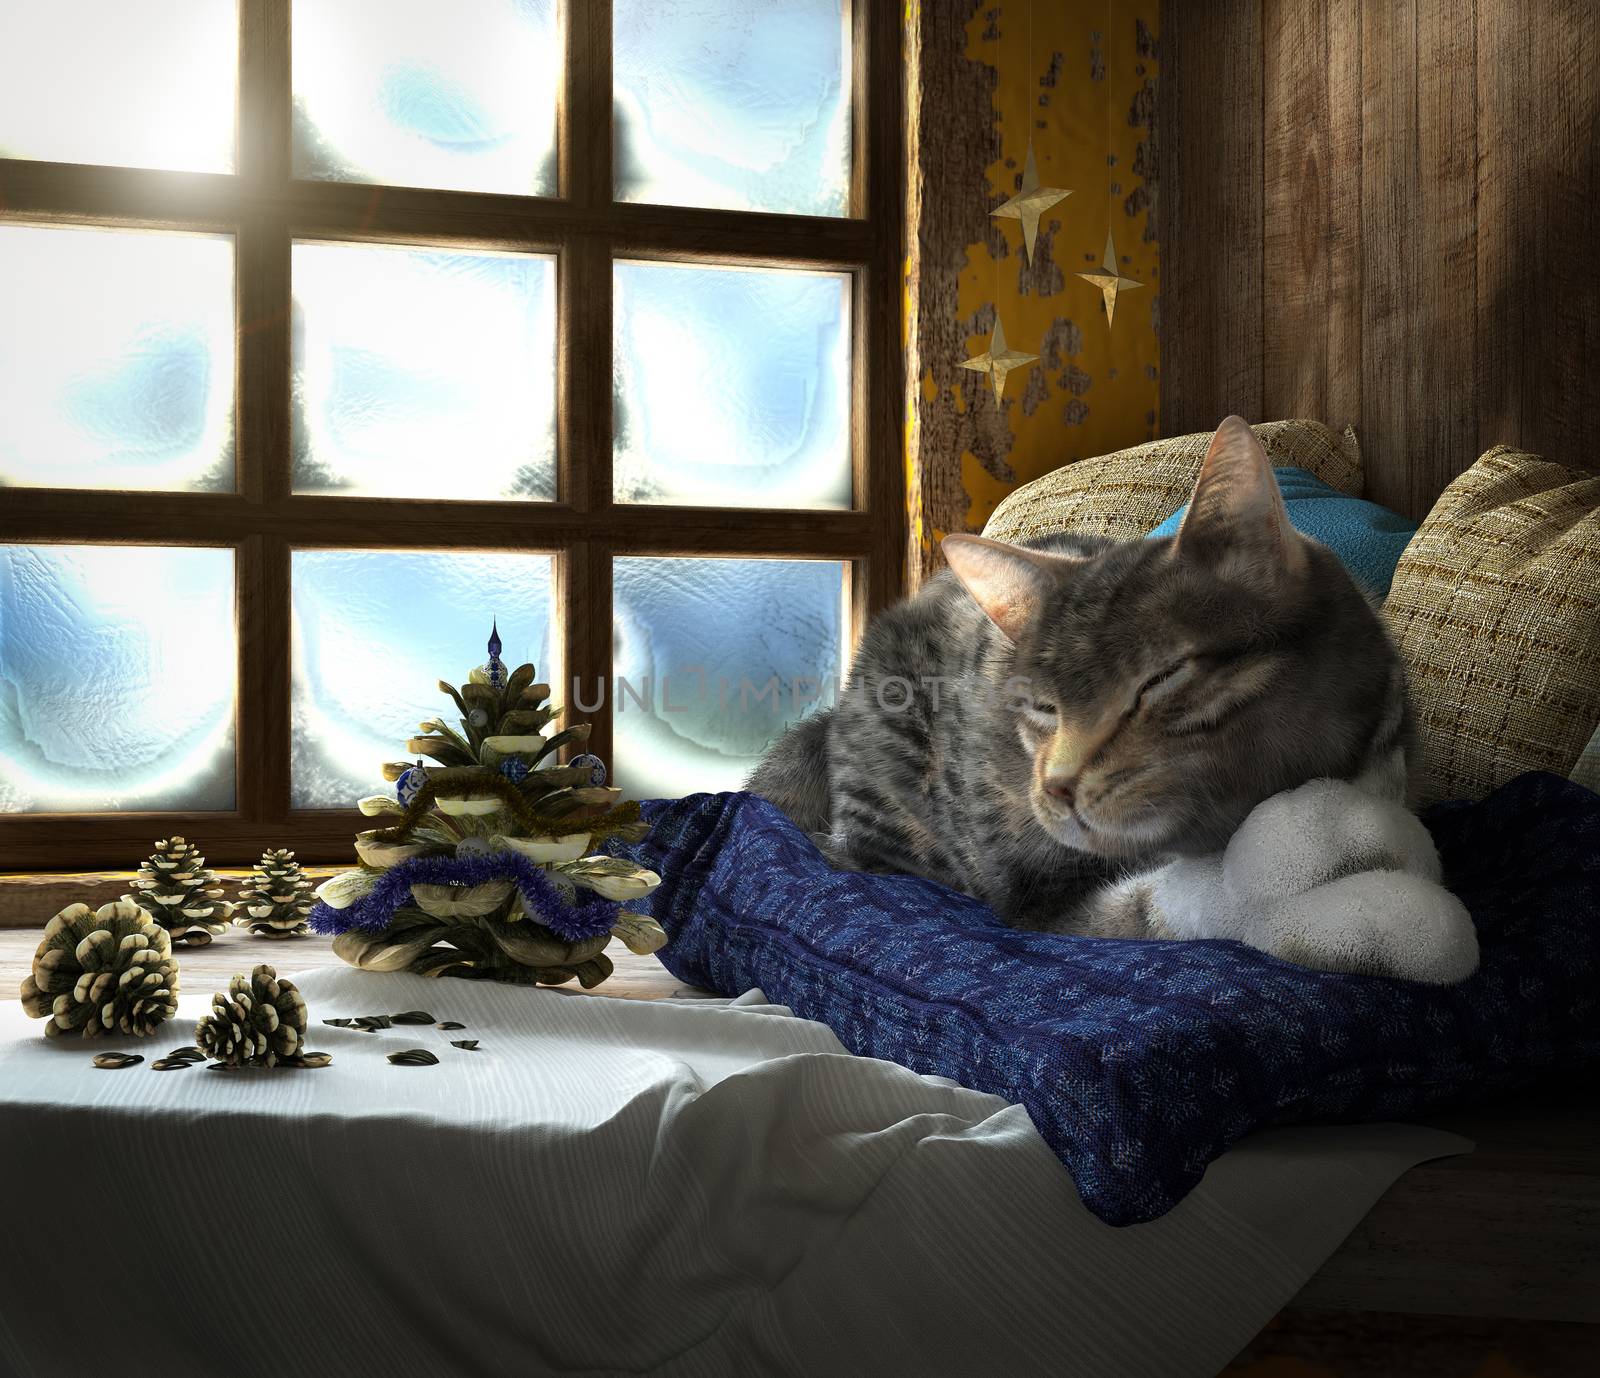 Sleeping cat on winter window background concept composition 3d render by denisgo